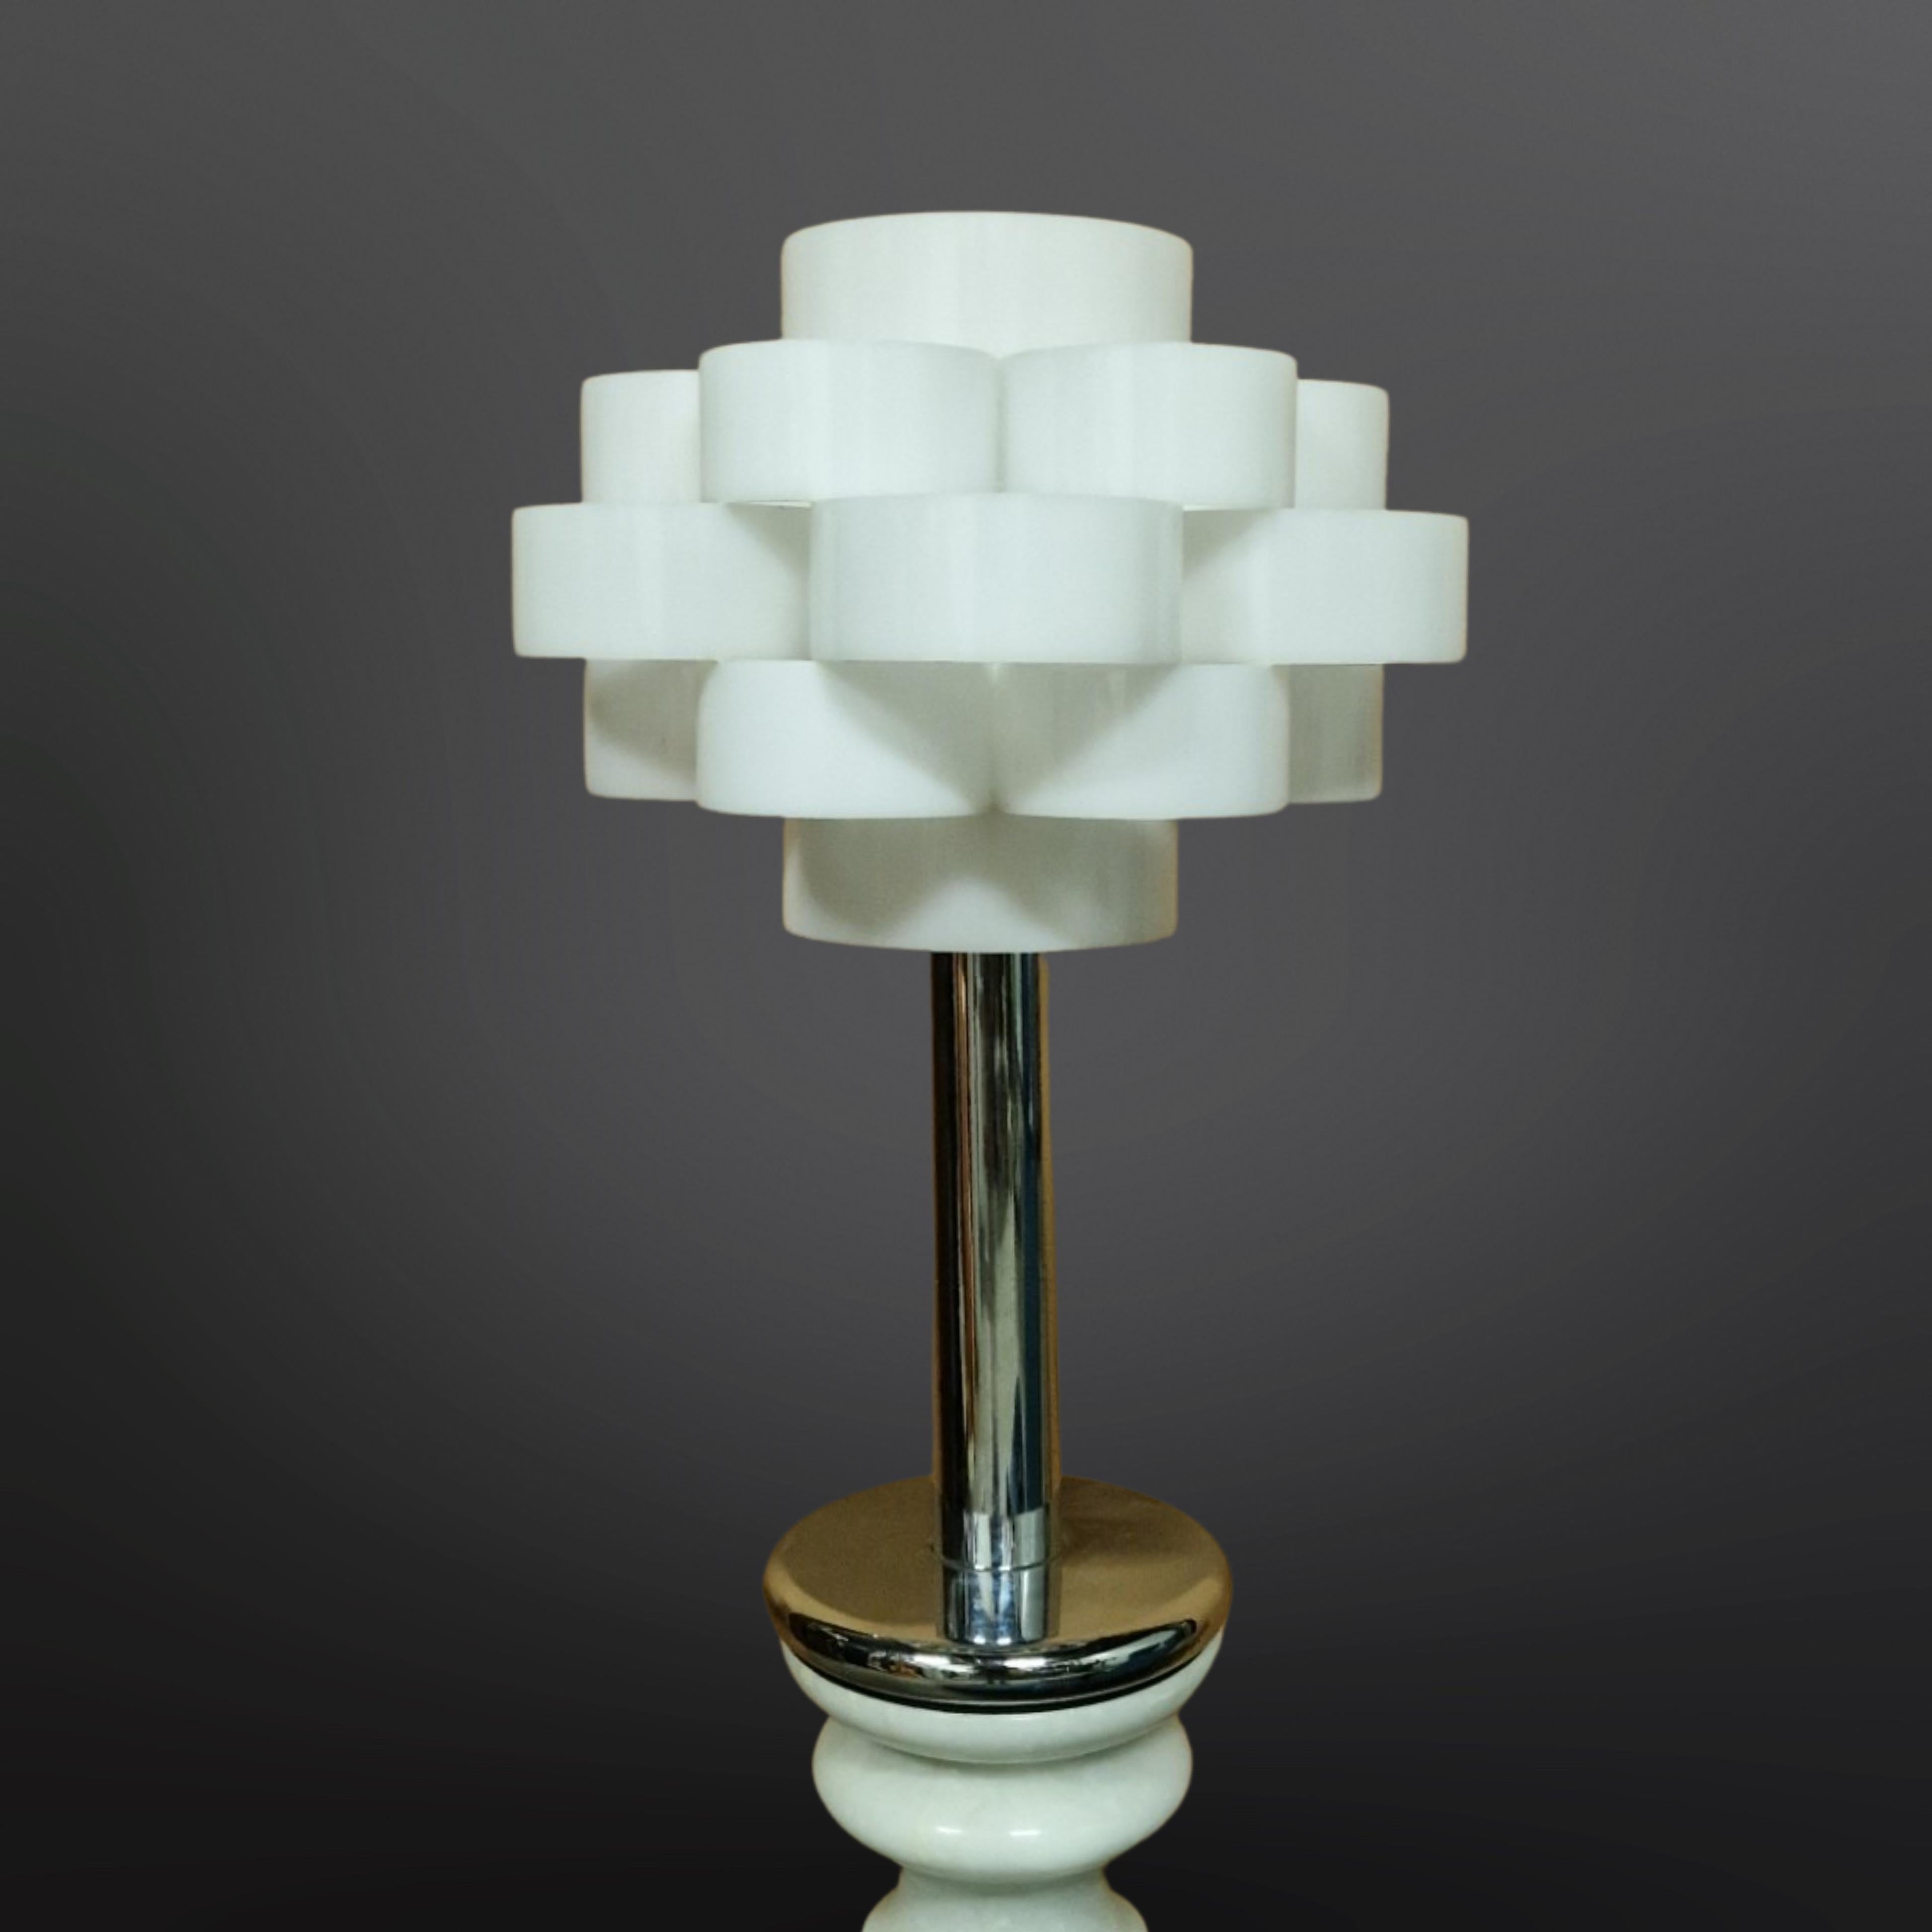 Space age table lamp with a plexiglass Verner Panton style shade. Made in Italy during the 1960s by Targetti. The base is made from chrome plated metal. The shade is made from stacked plexiglass rings. 

The shade measures 35cm in diameter. The